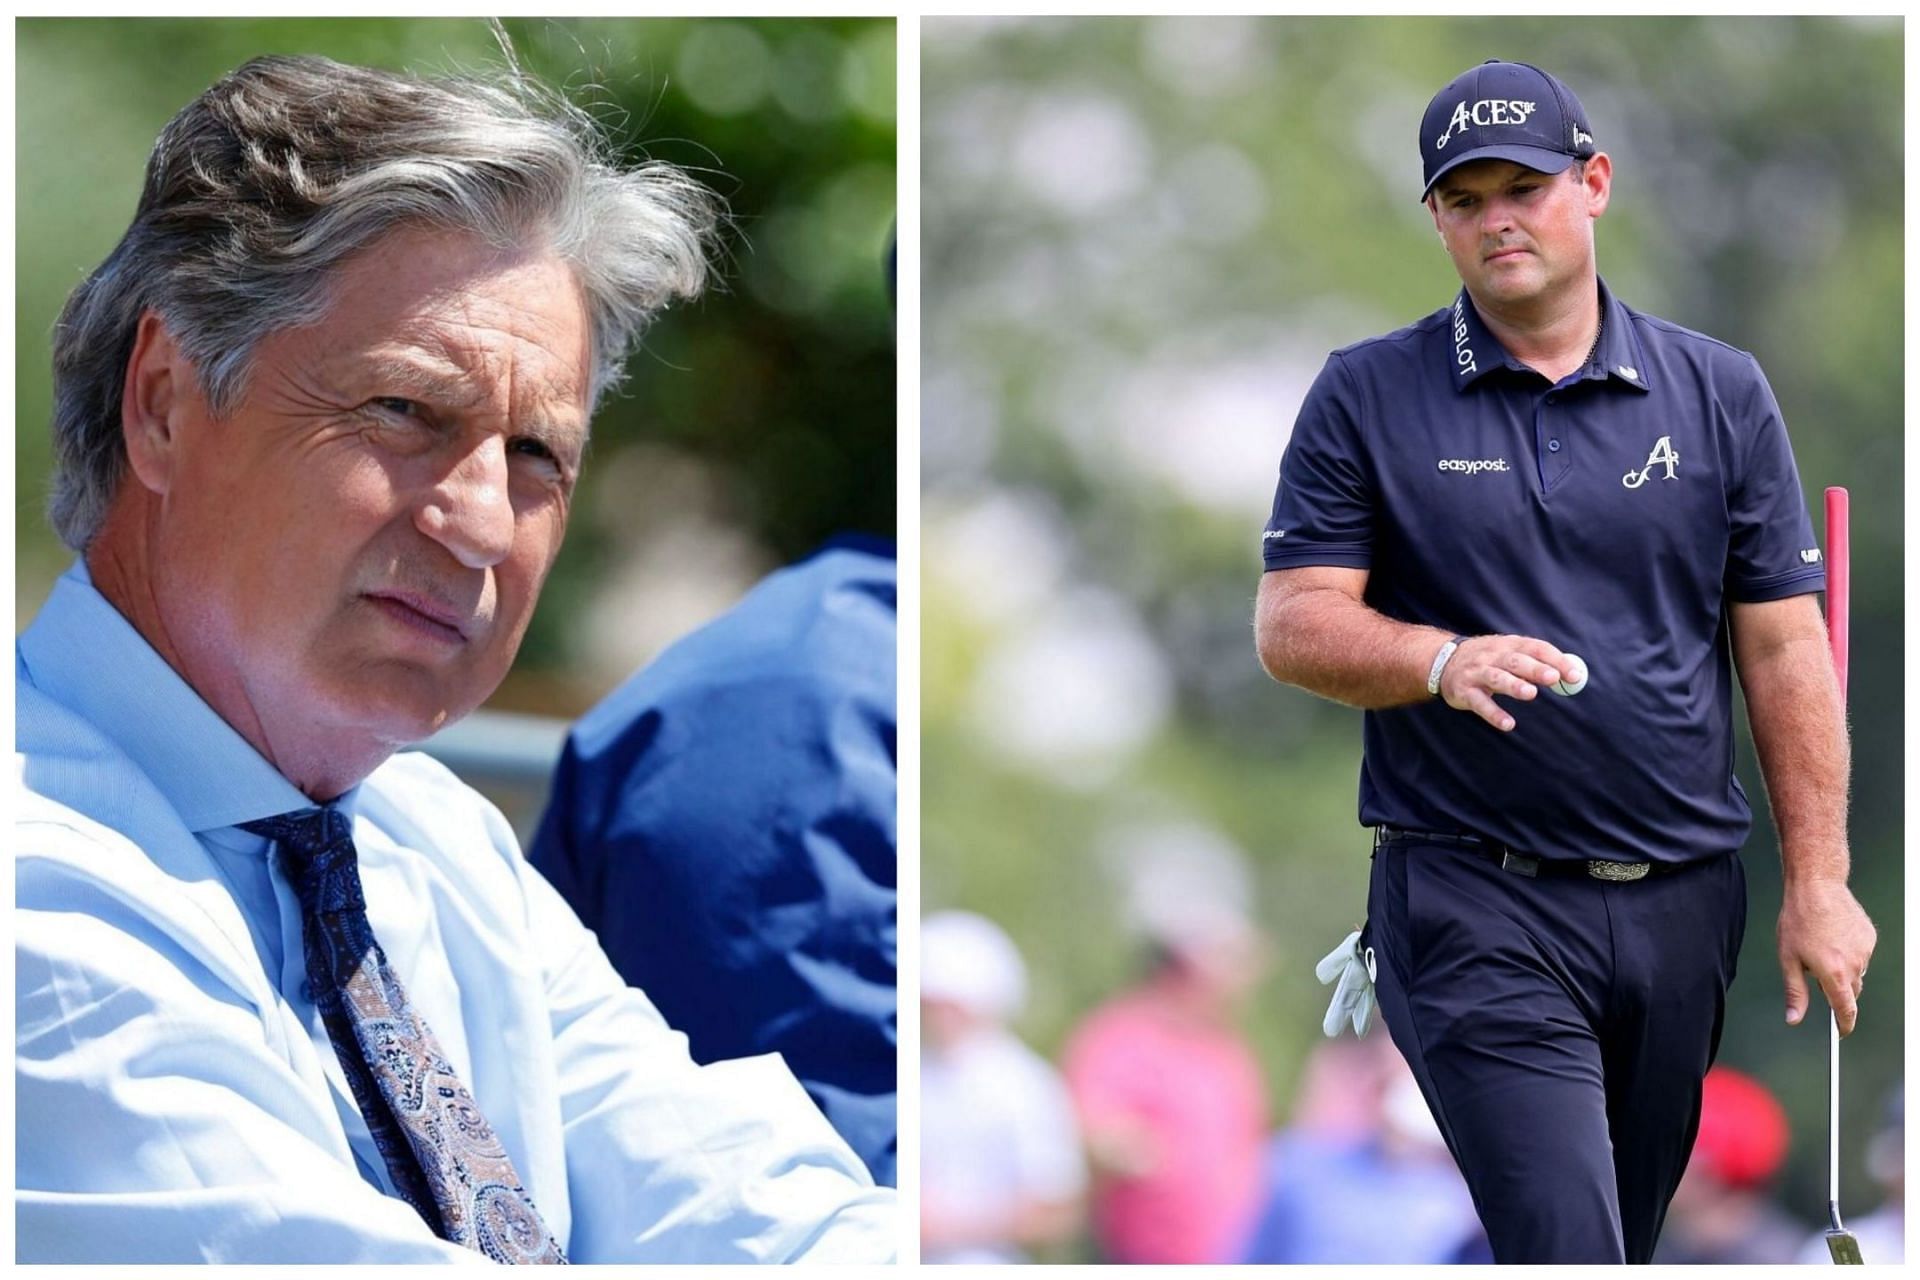 Brandel Chamblee took at dig at Patrick Reed after the latest judgement